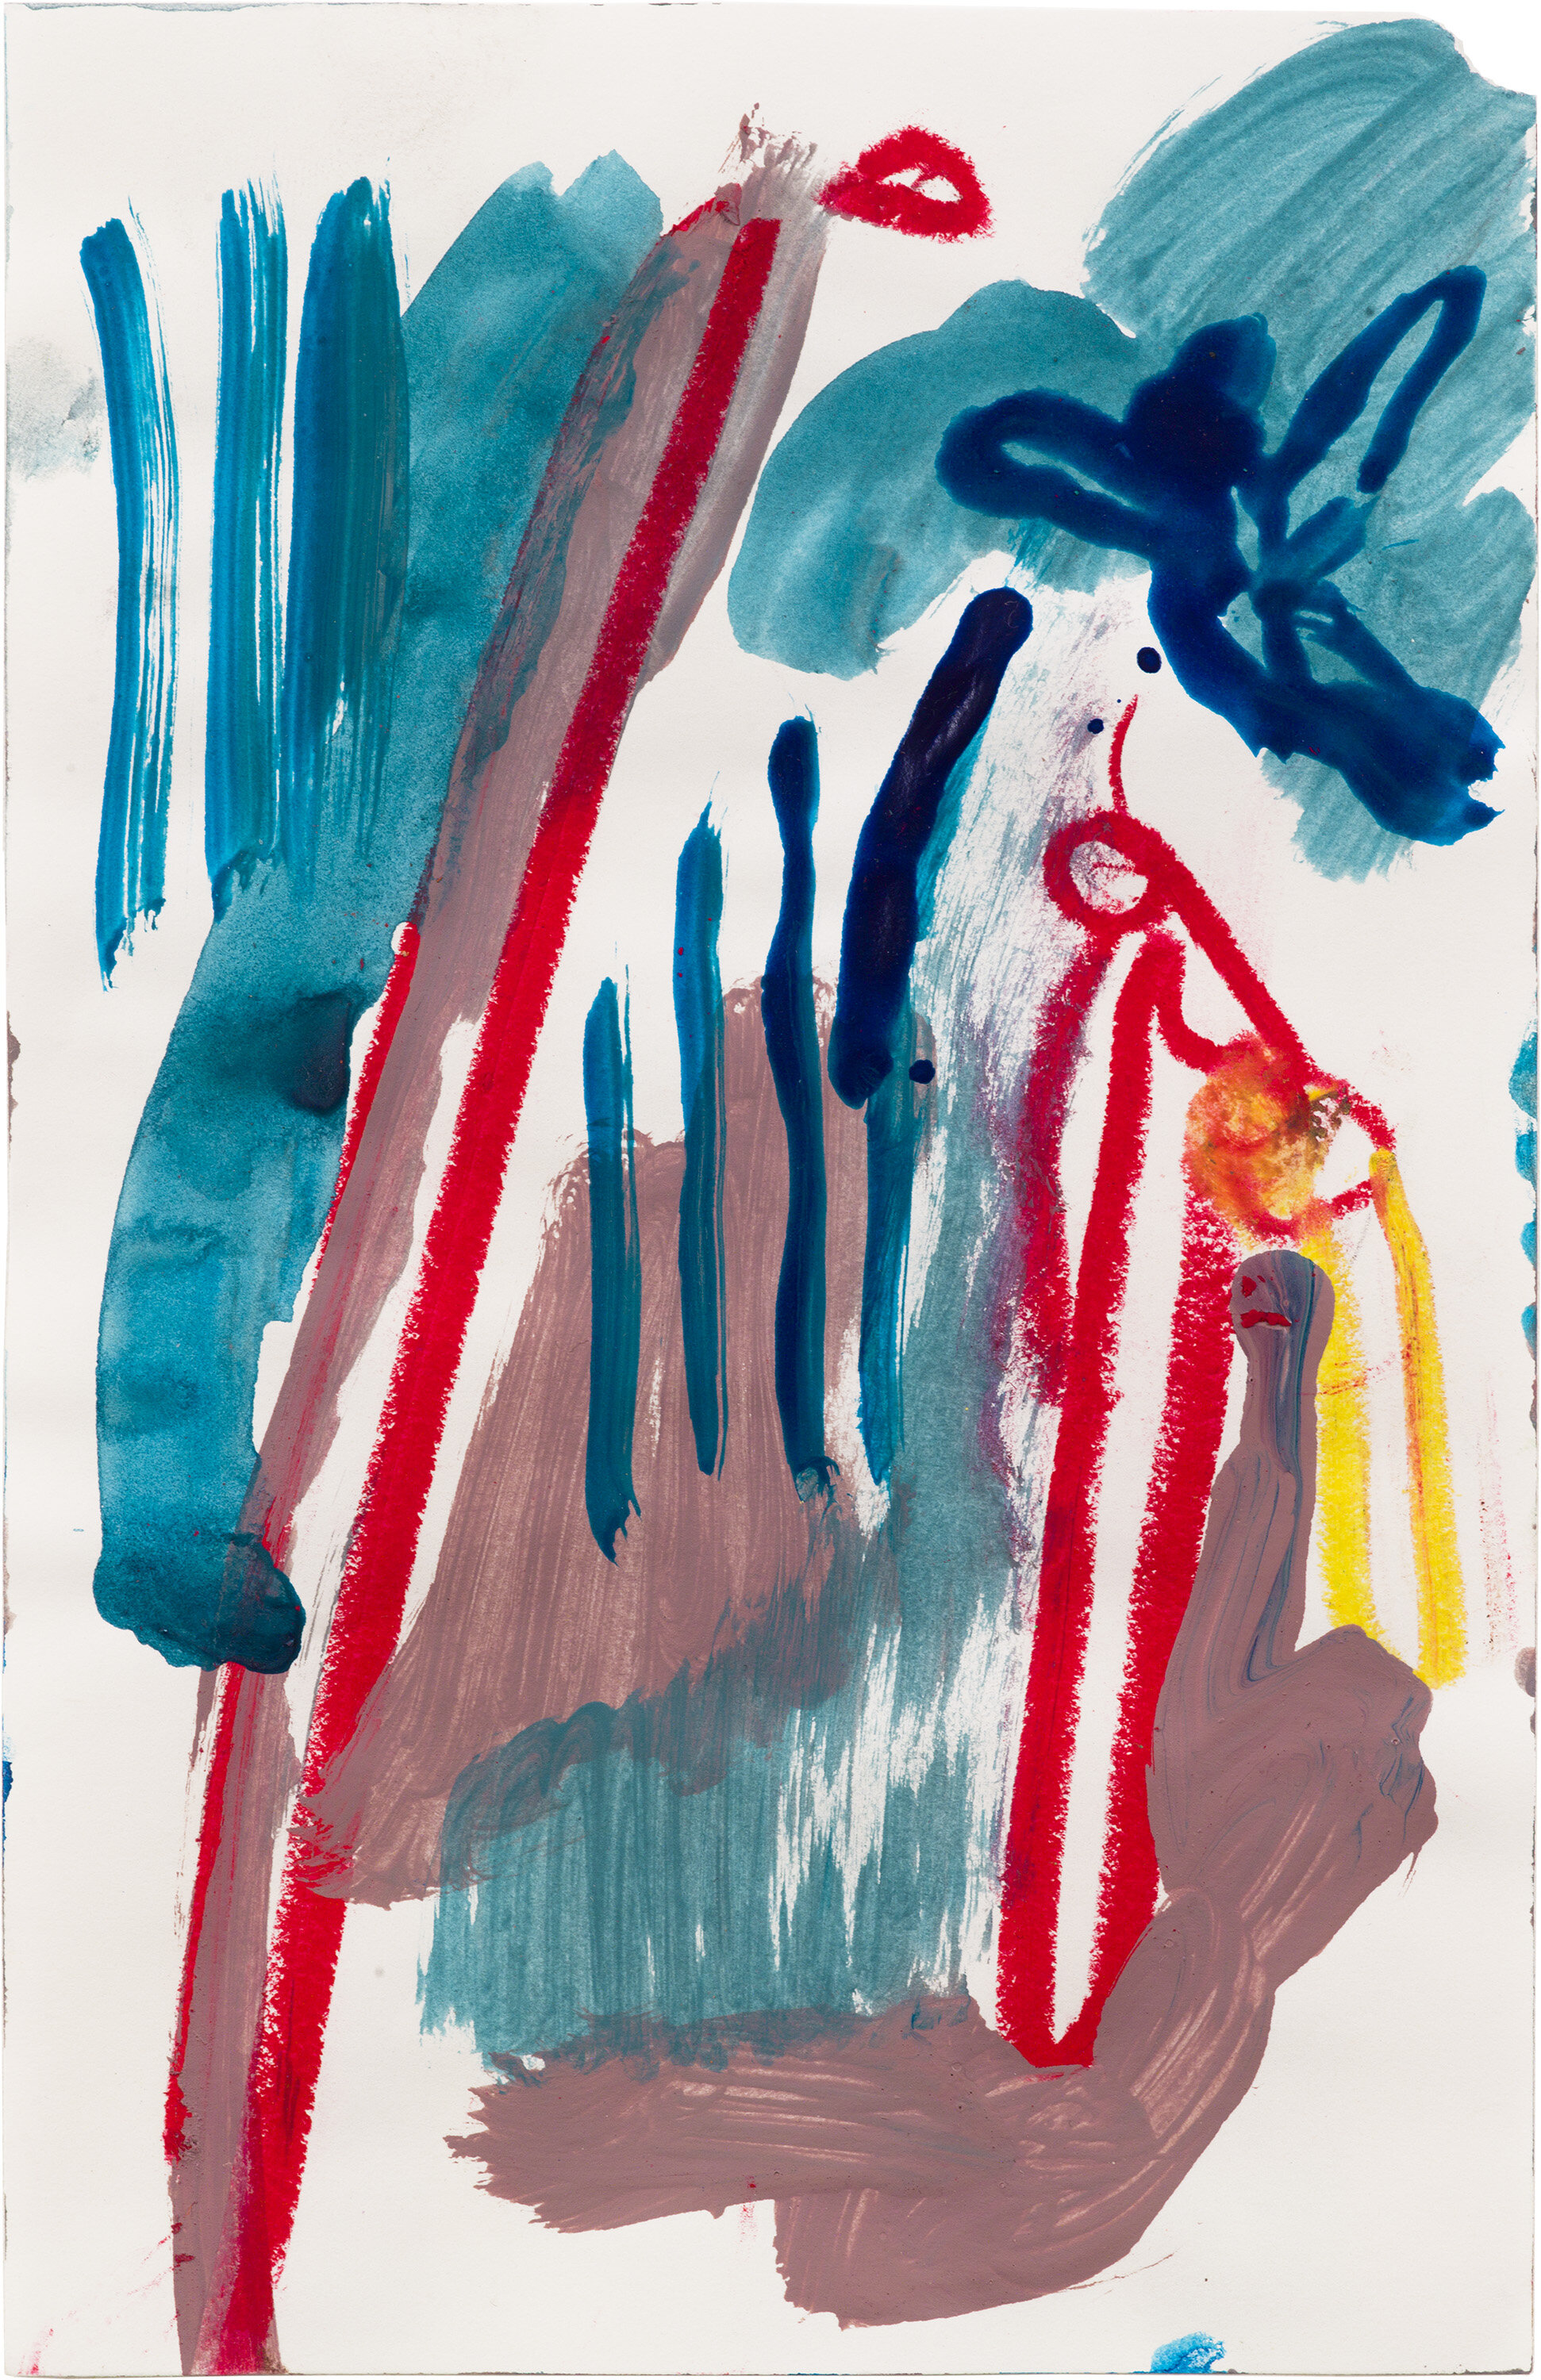  Drew Beattie and Ben Shepard  DBBS-DRW-2013-009   2013 acrylic and oil stick on paper 8.5 x 5.5 inches 